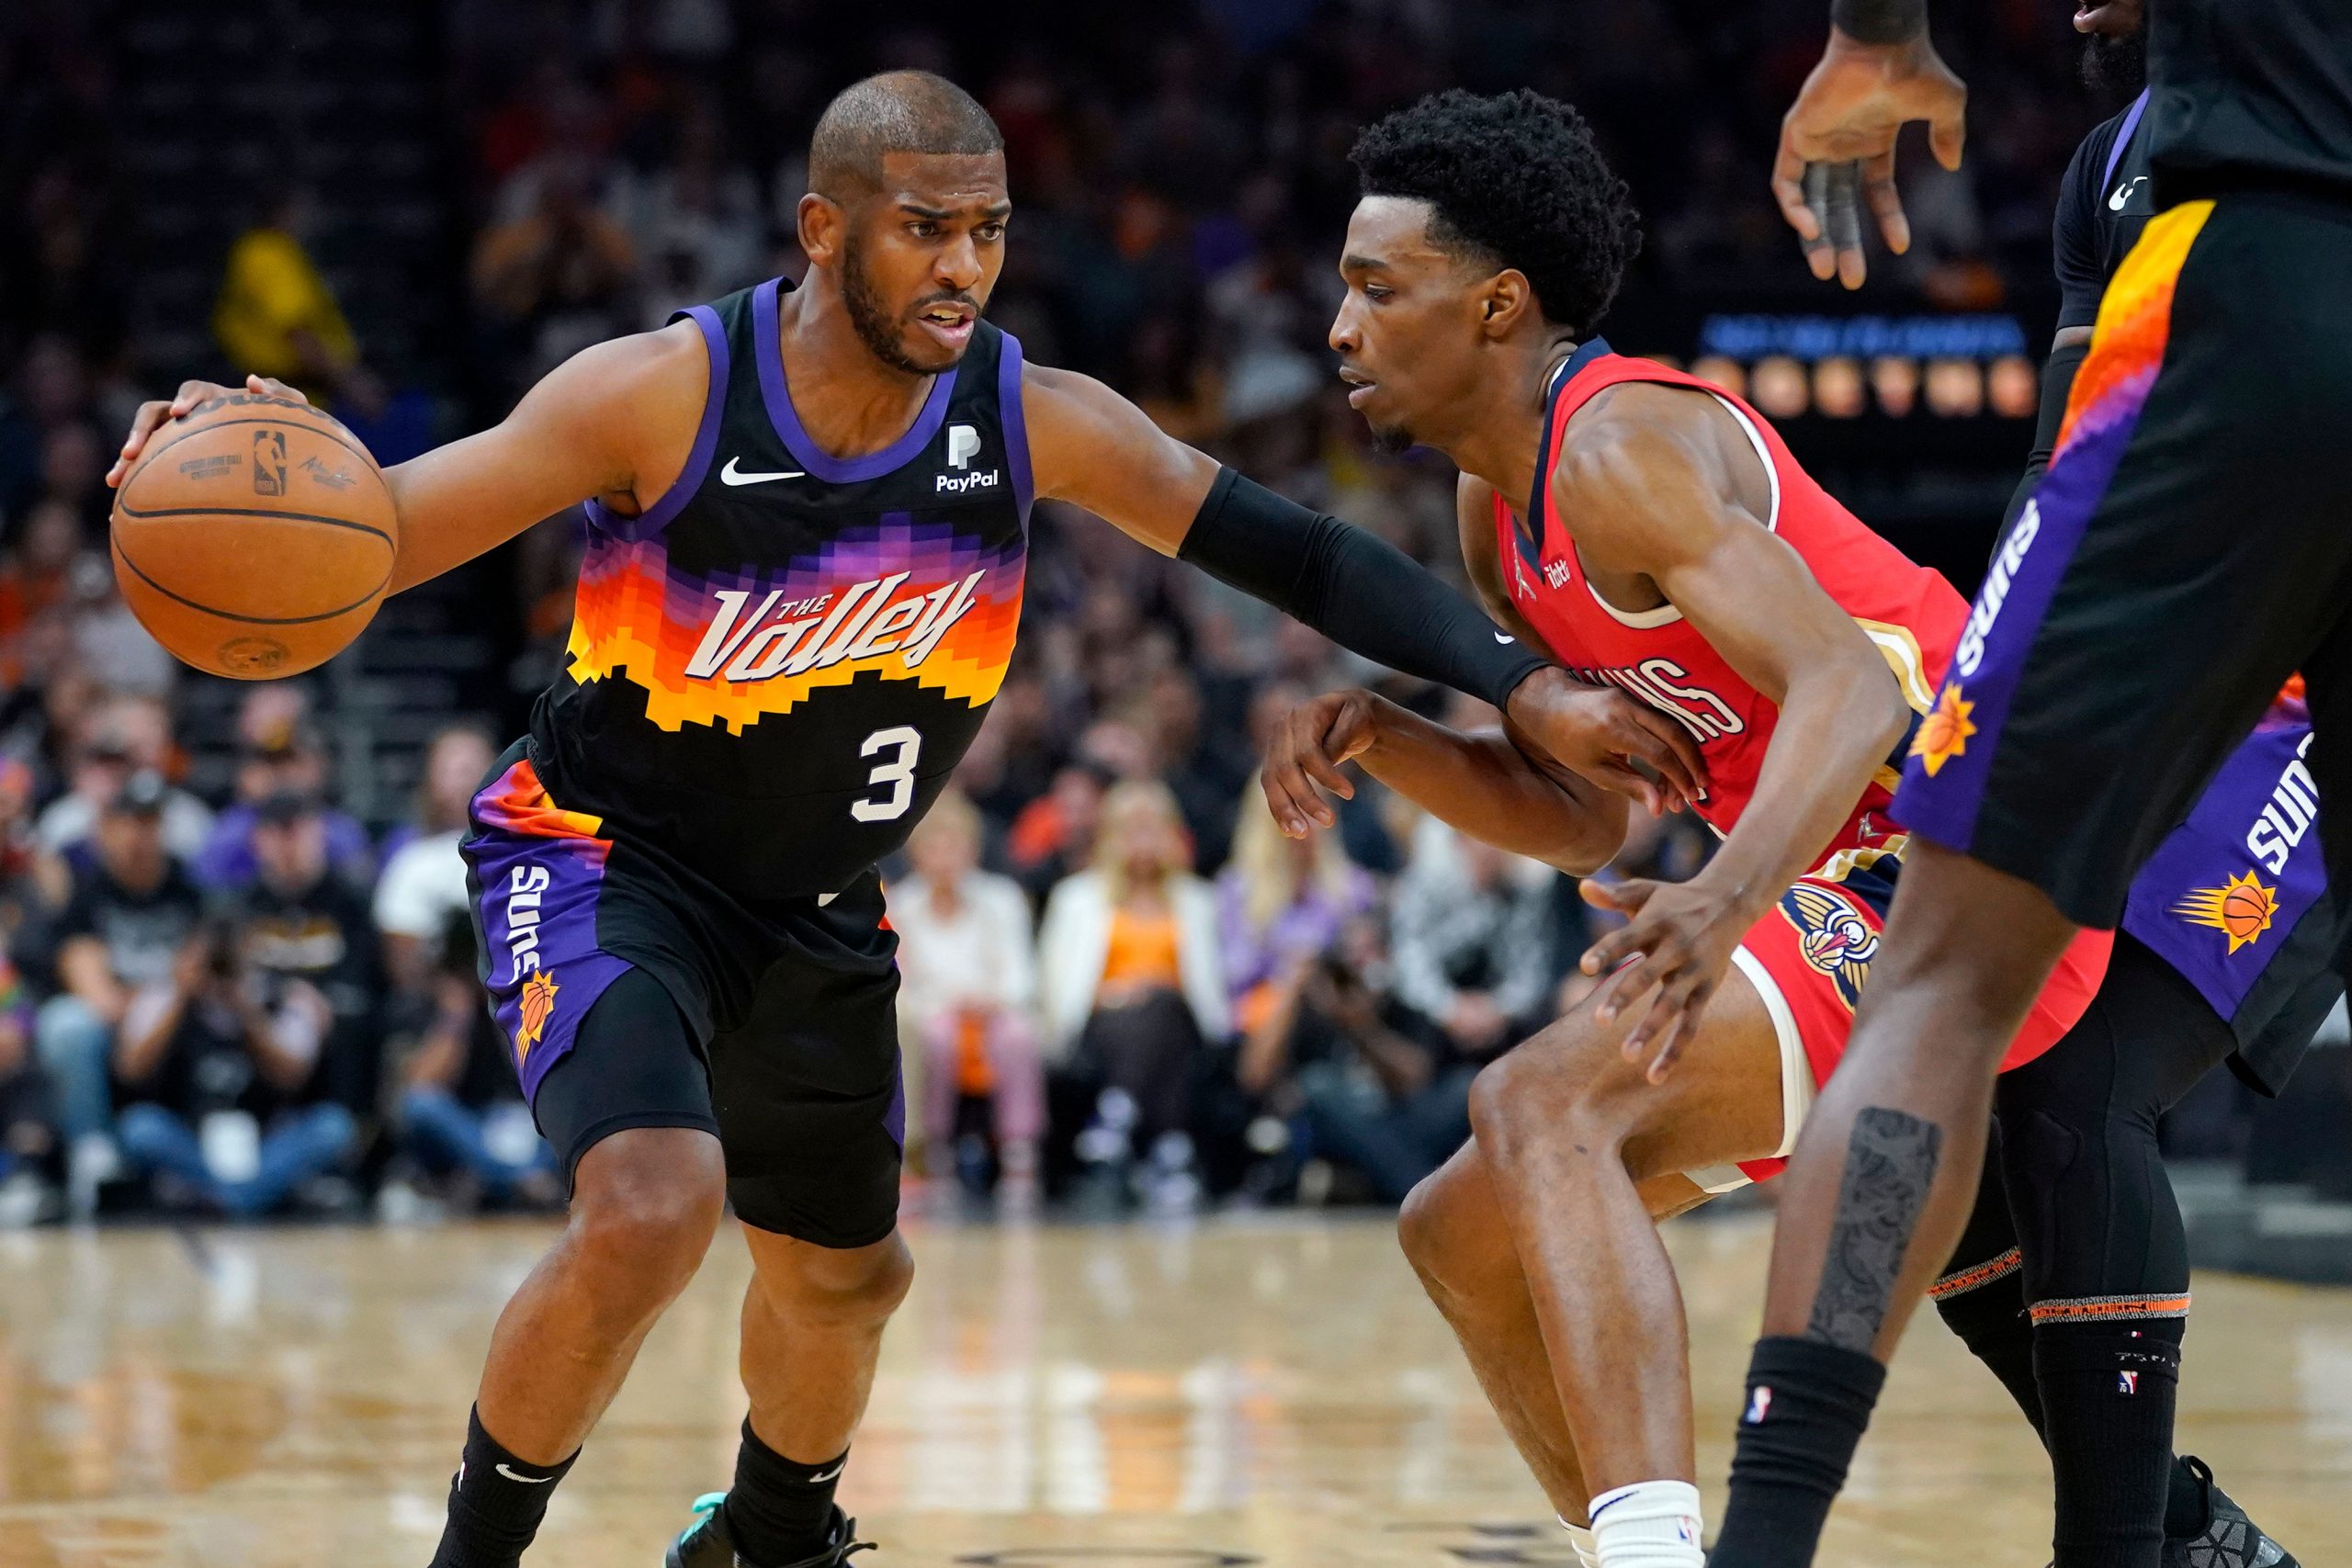 Chris Paul takes over in 4th, Phoenix Suns beat New Orleans Pelicans 110-99